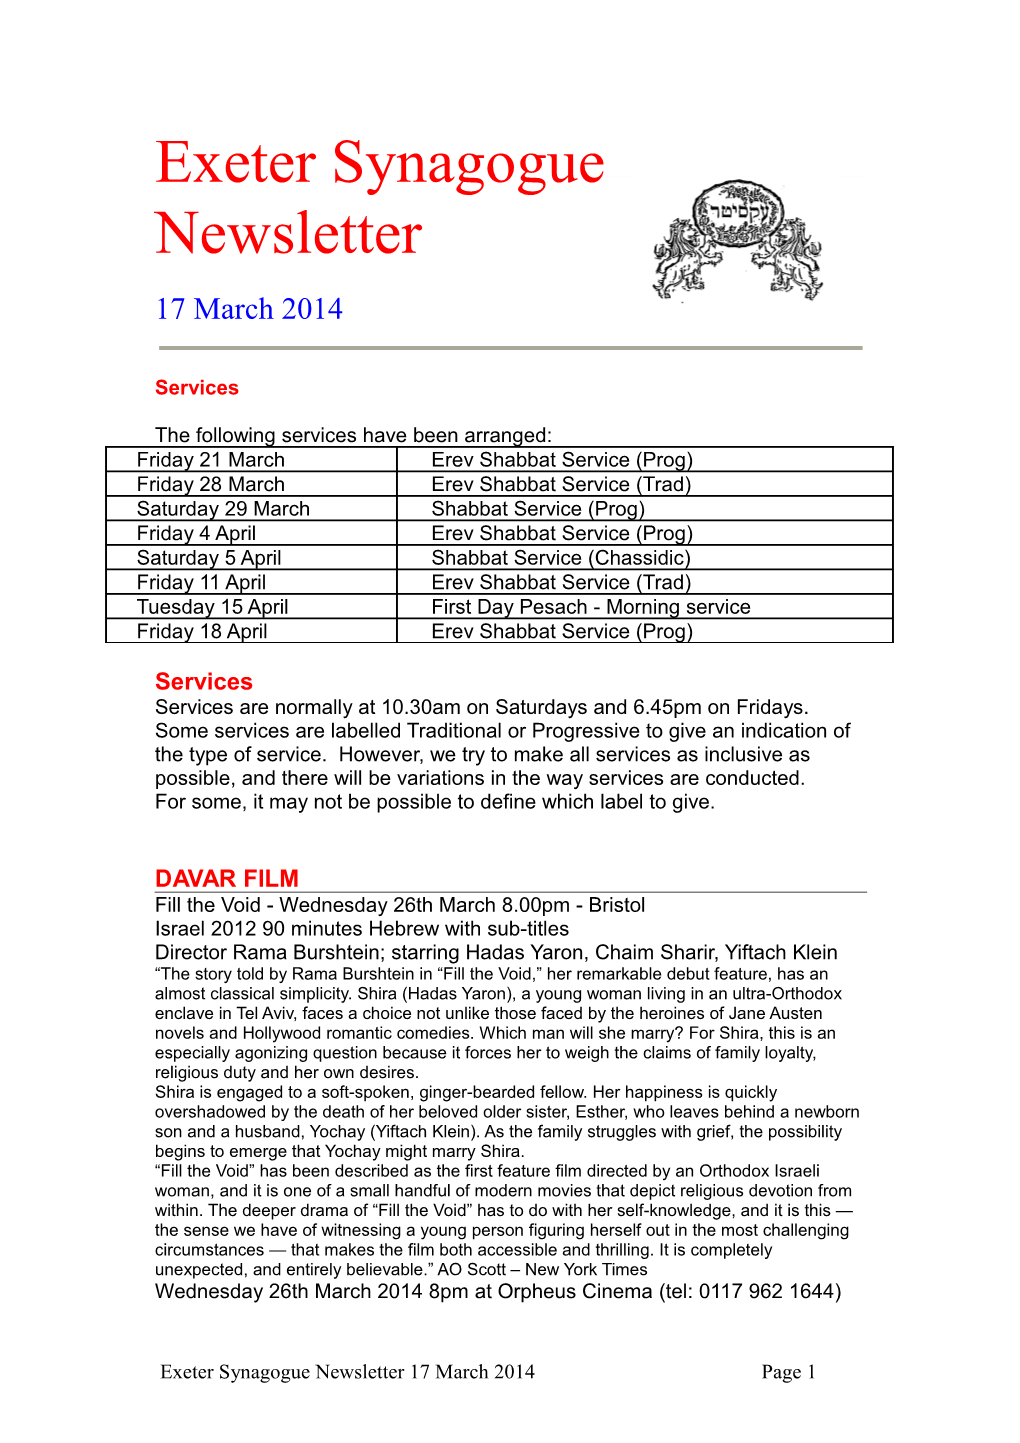 Exeter Synagogue Newsletter 17 March 2014